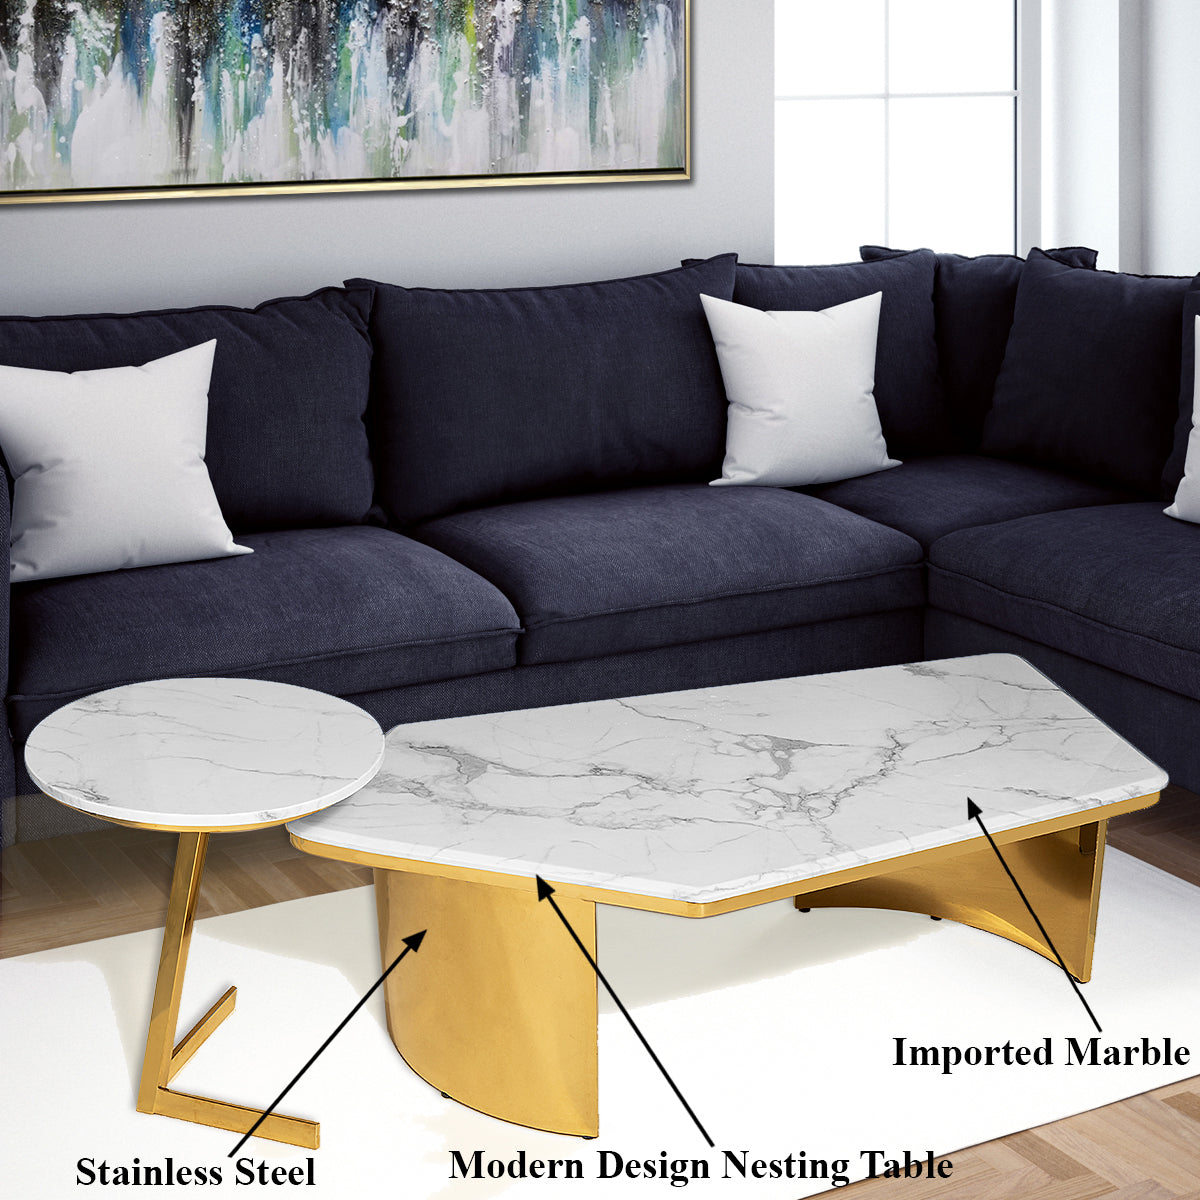 Best sofa tables to buy for your home – Get The Modern Furniture for Your  Home